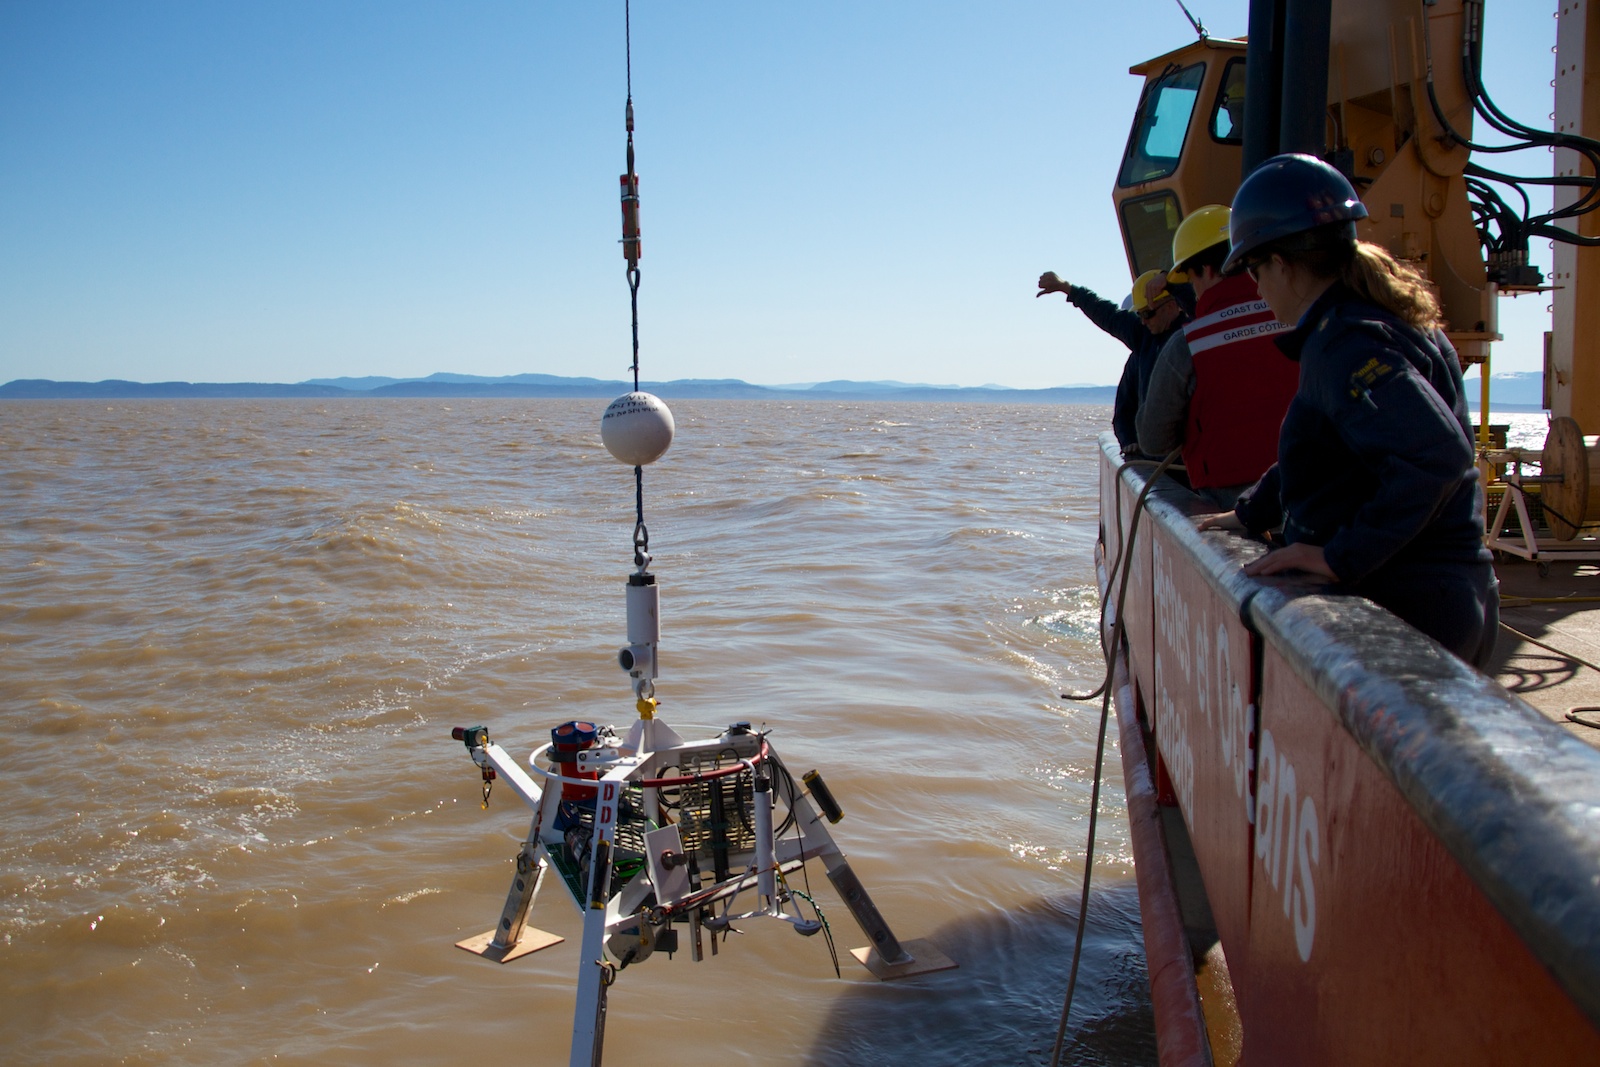 The Delta Dynamics Lab is deployed via winch from the CCGS Tully, near the mouth of the Fraser River, 3 May 2013.